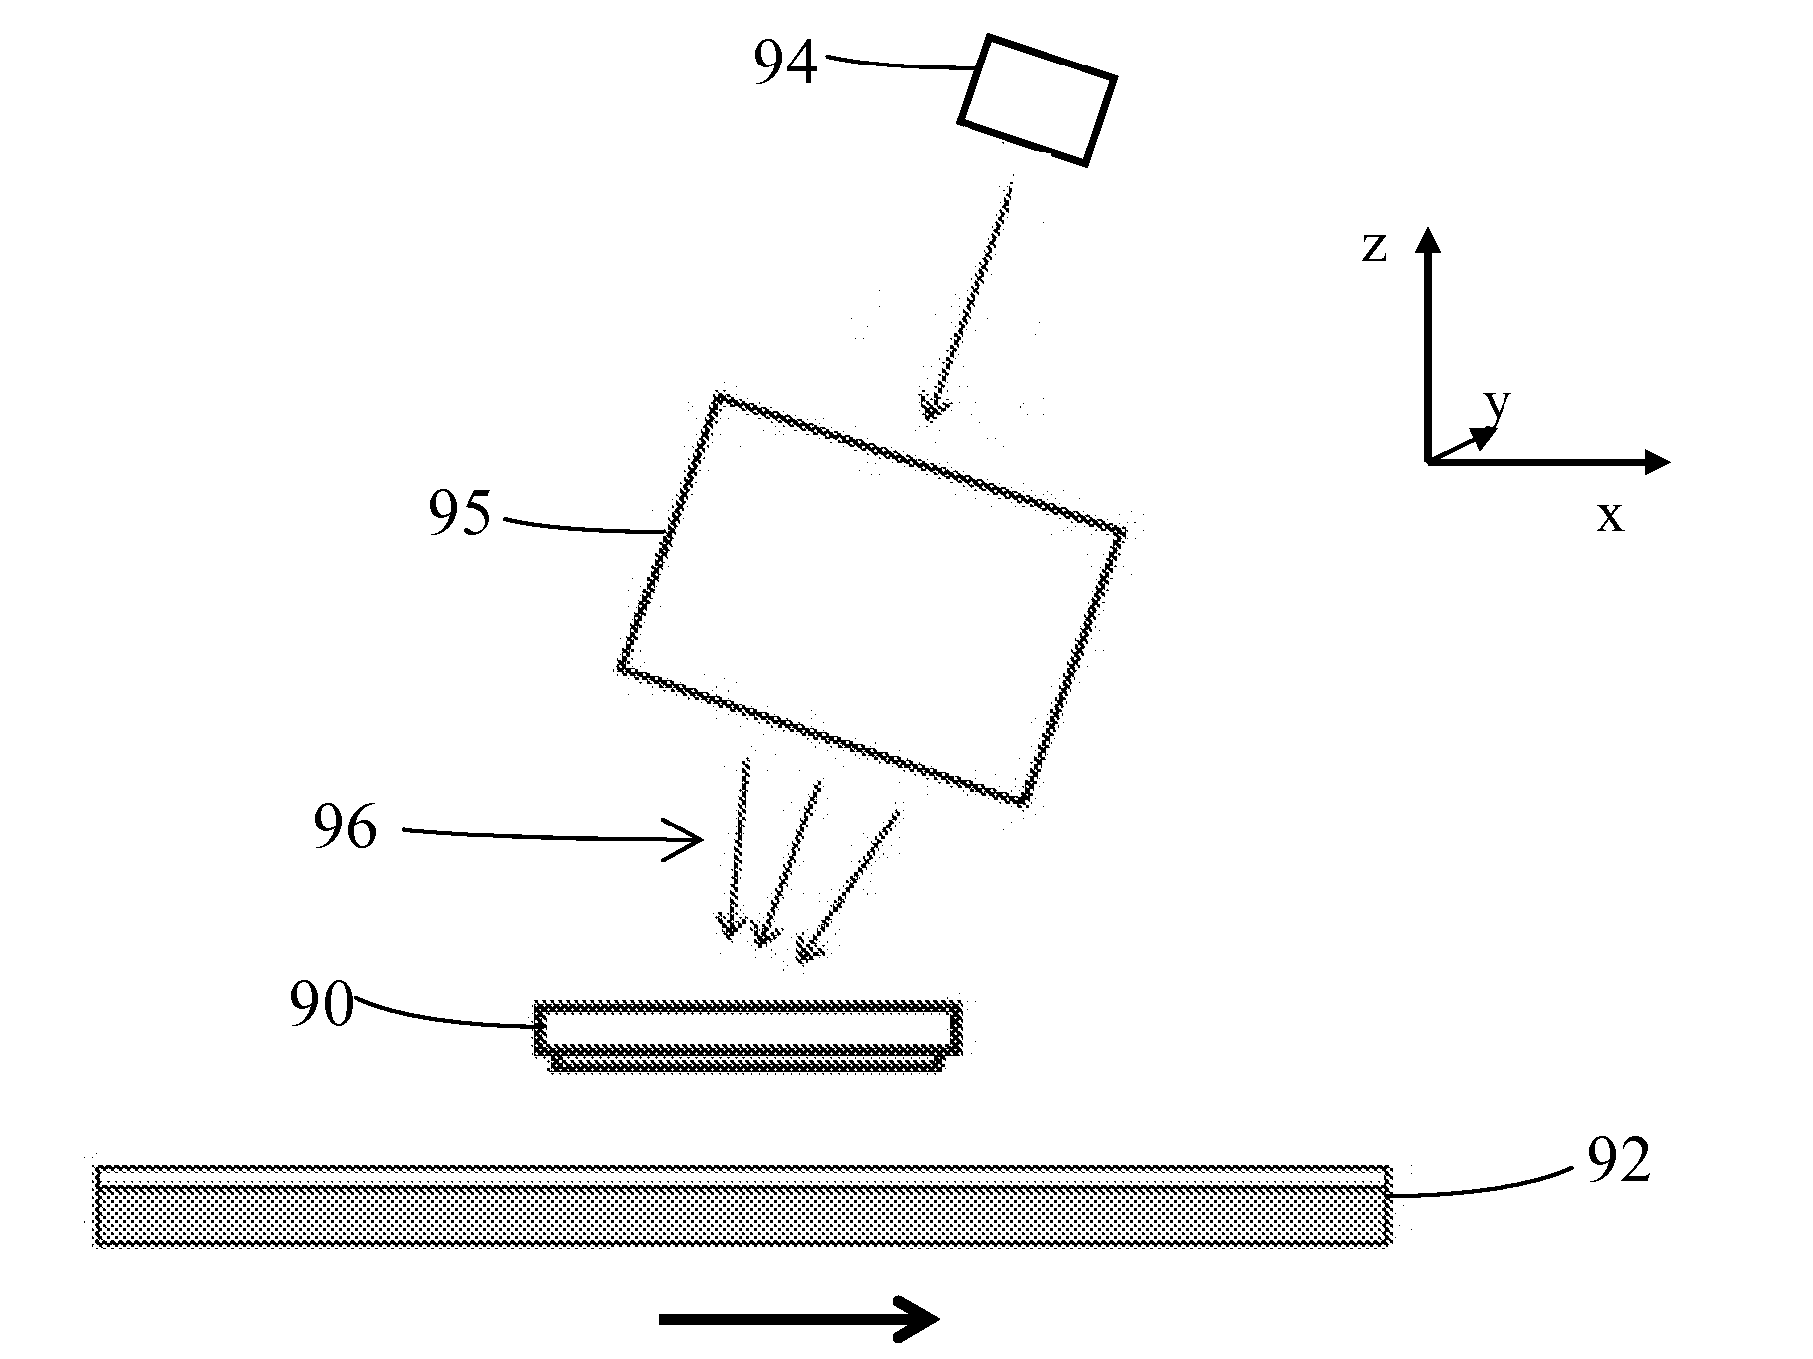 System and method for production of nanostructures over large areas